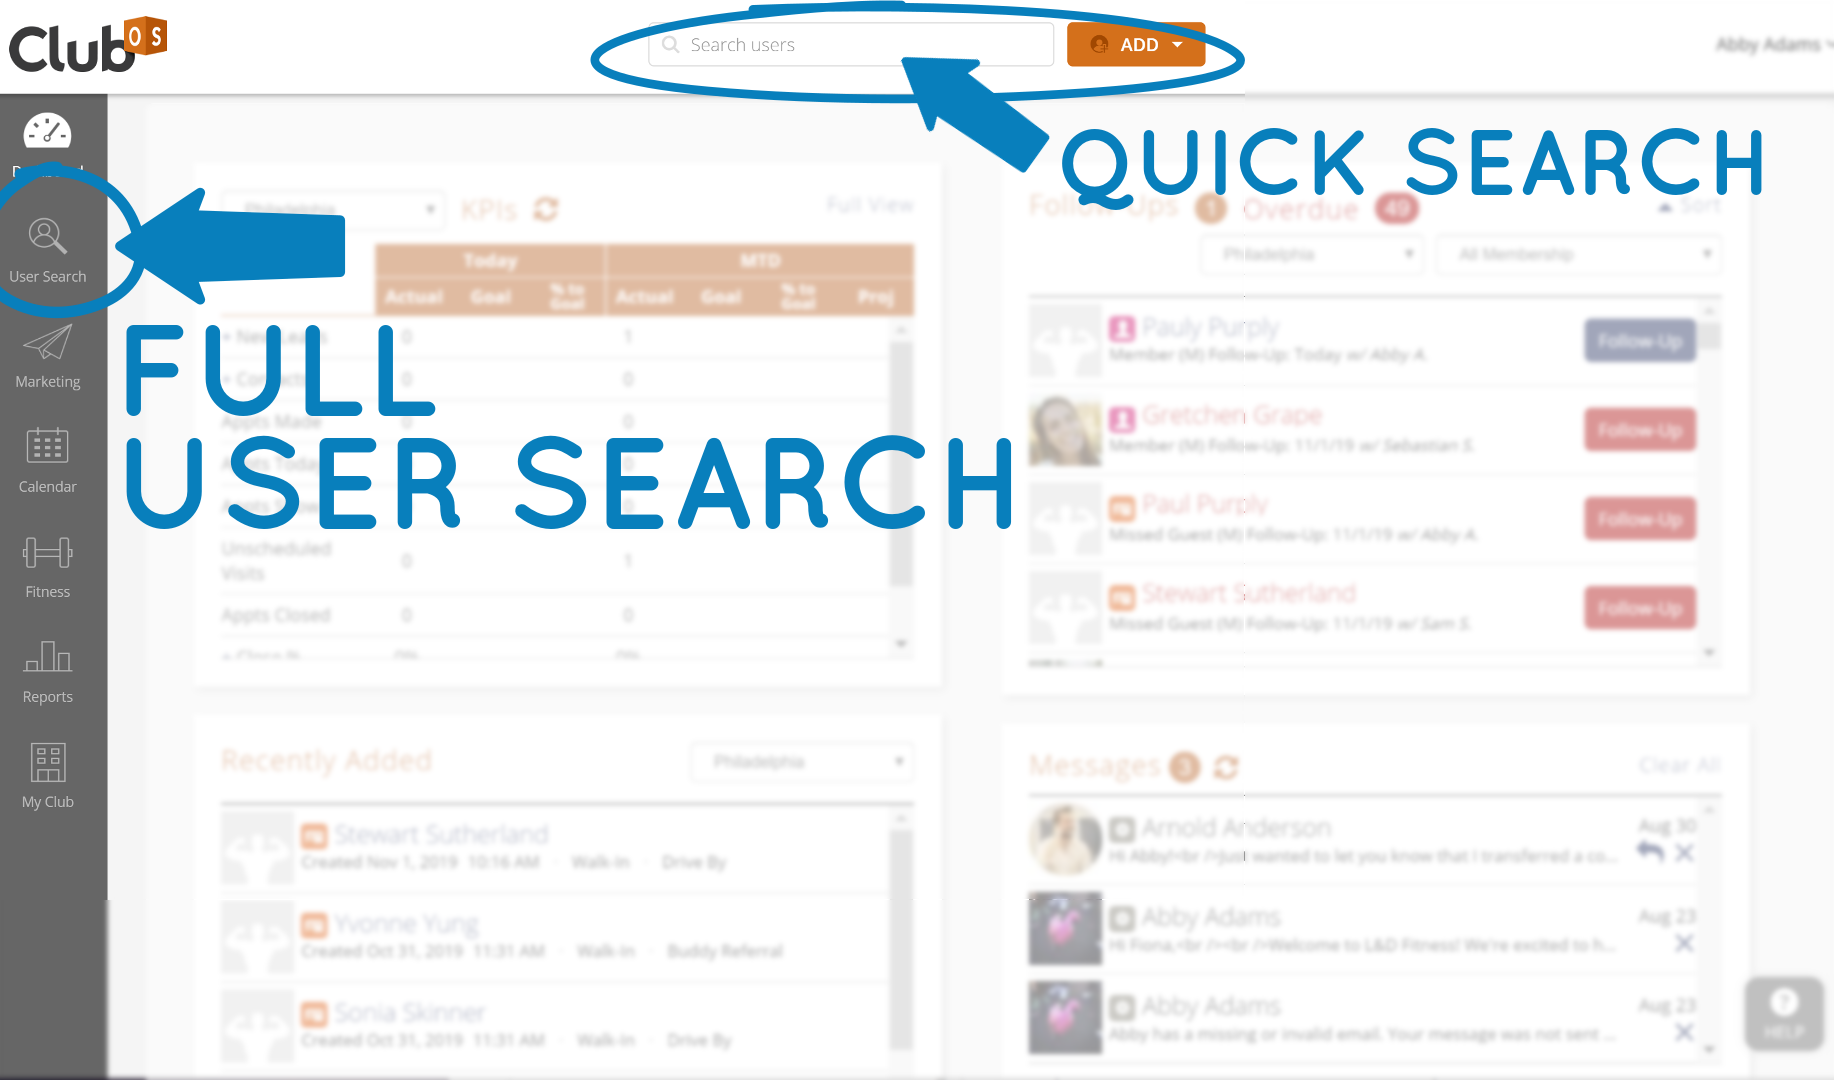 Two options for User Search